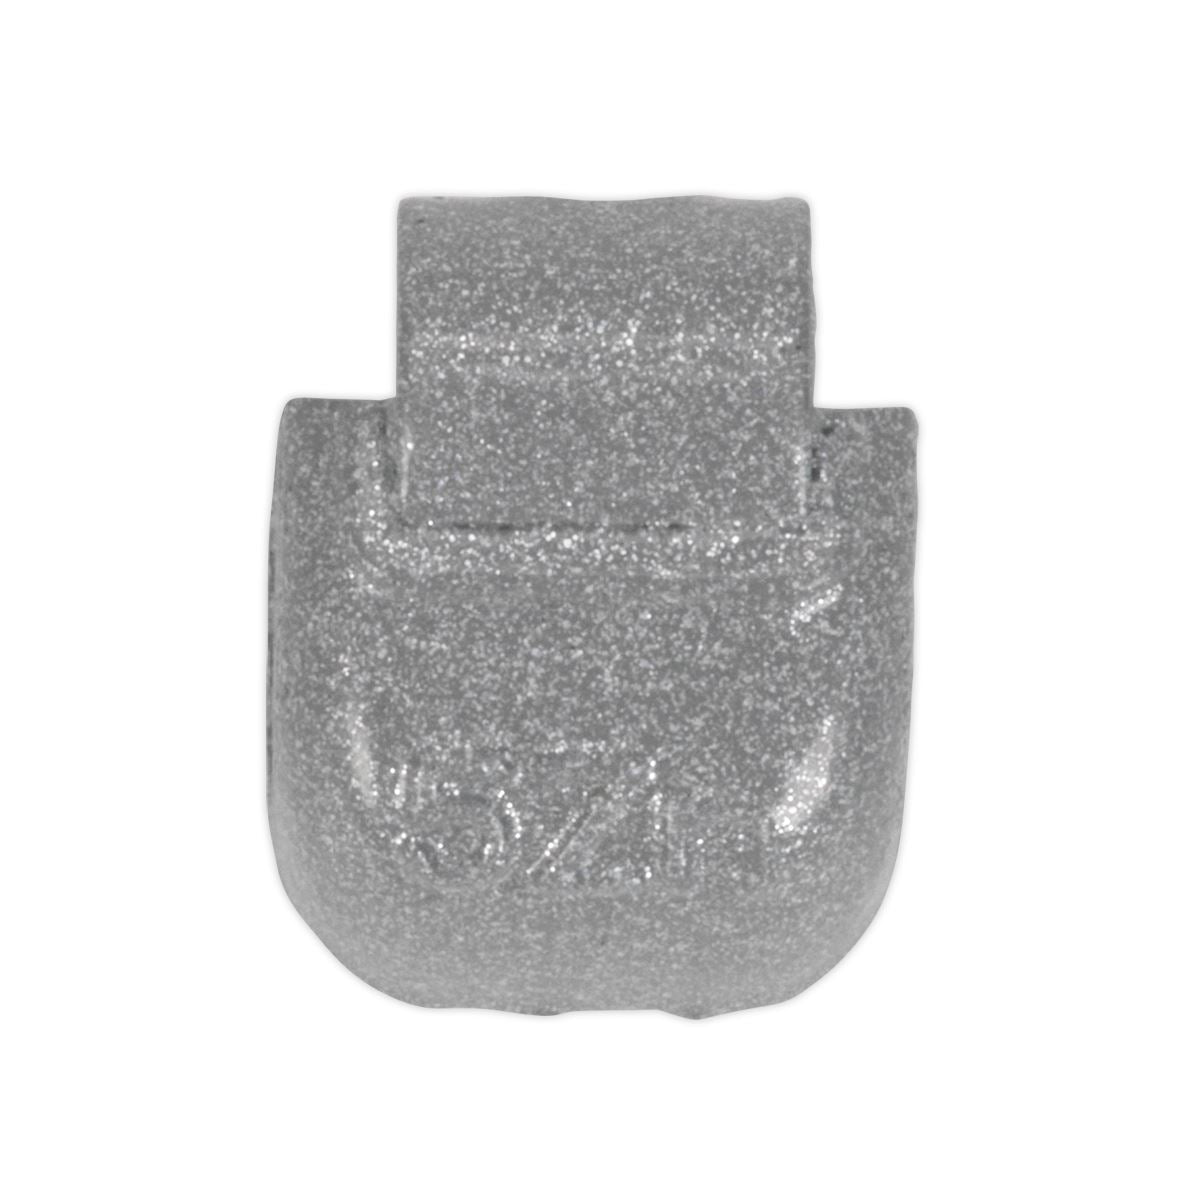 Sealey Wheel Weight 5g Hammer-On Zinc for Steel Wheels Pack of 100